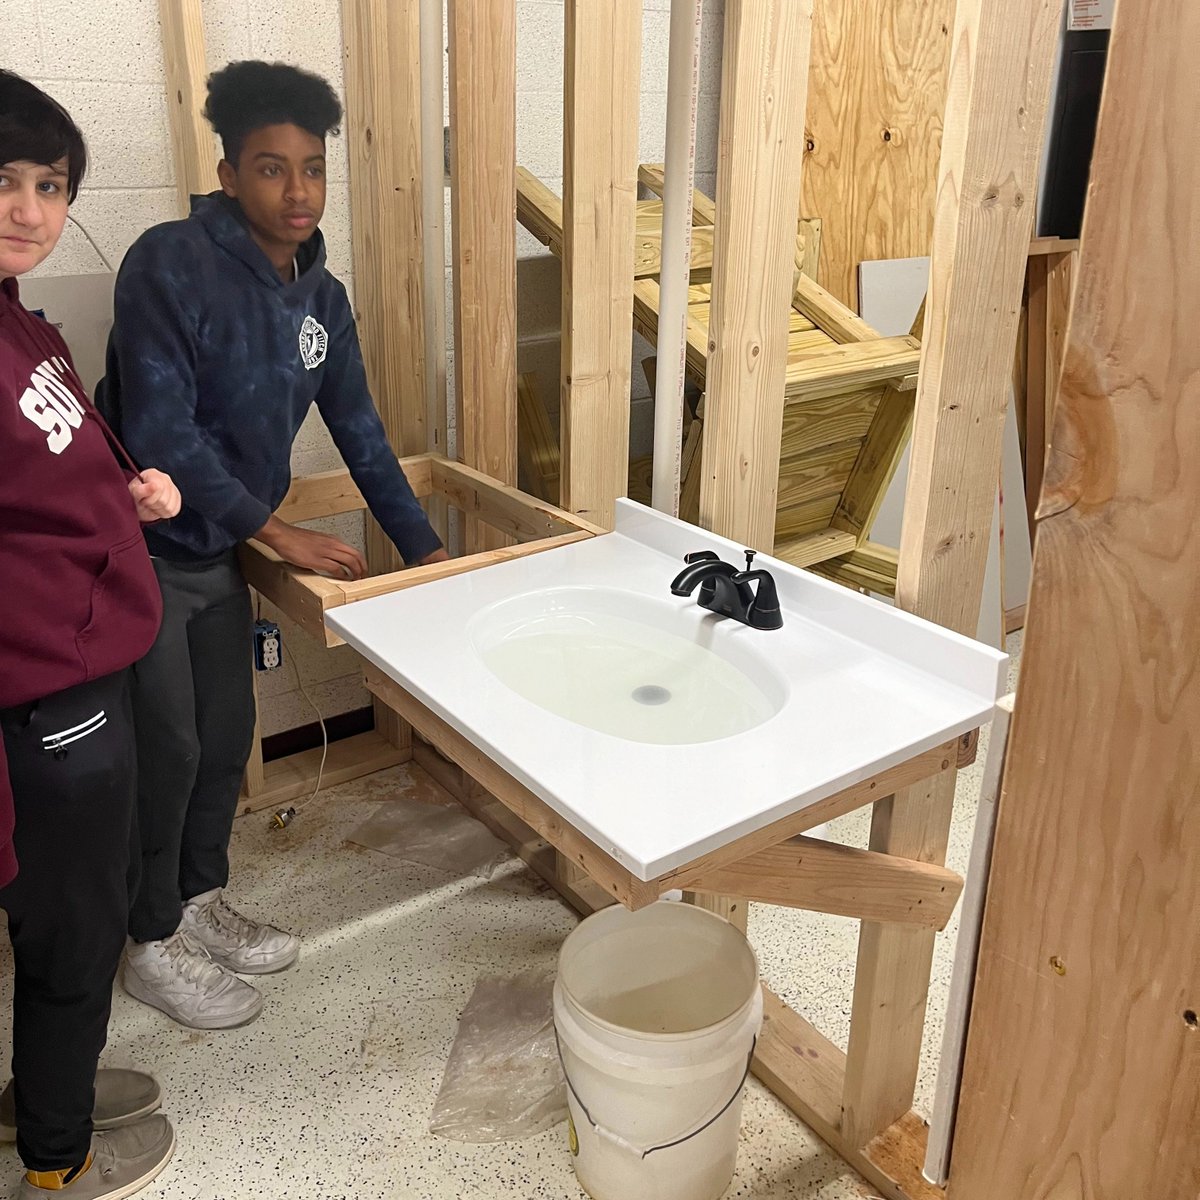 Anyone need plumbing work done? Well, maybe not *yet* but soon, as our Project SPEAR-IT students are learning how to solder copper pipe connections and hook up sinks. 'A bit messy,' according to teacher Tim O'Leary, 'but they certainly are enjoying it.'